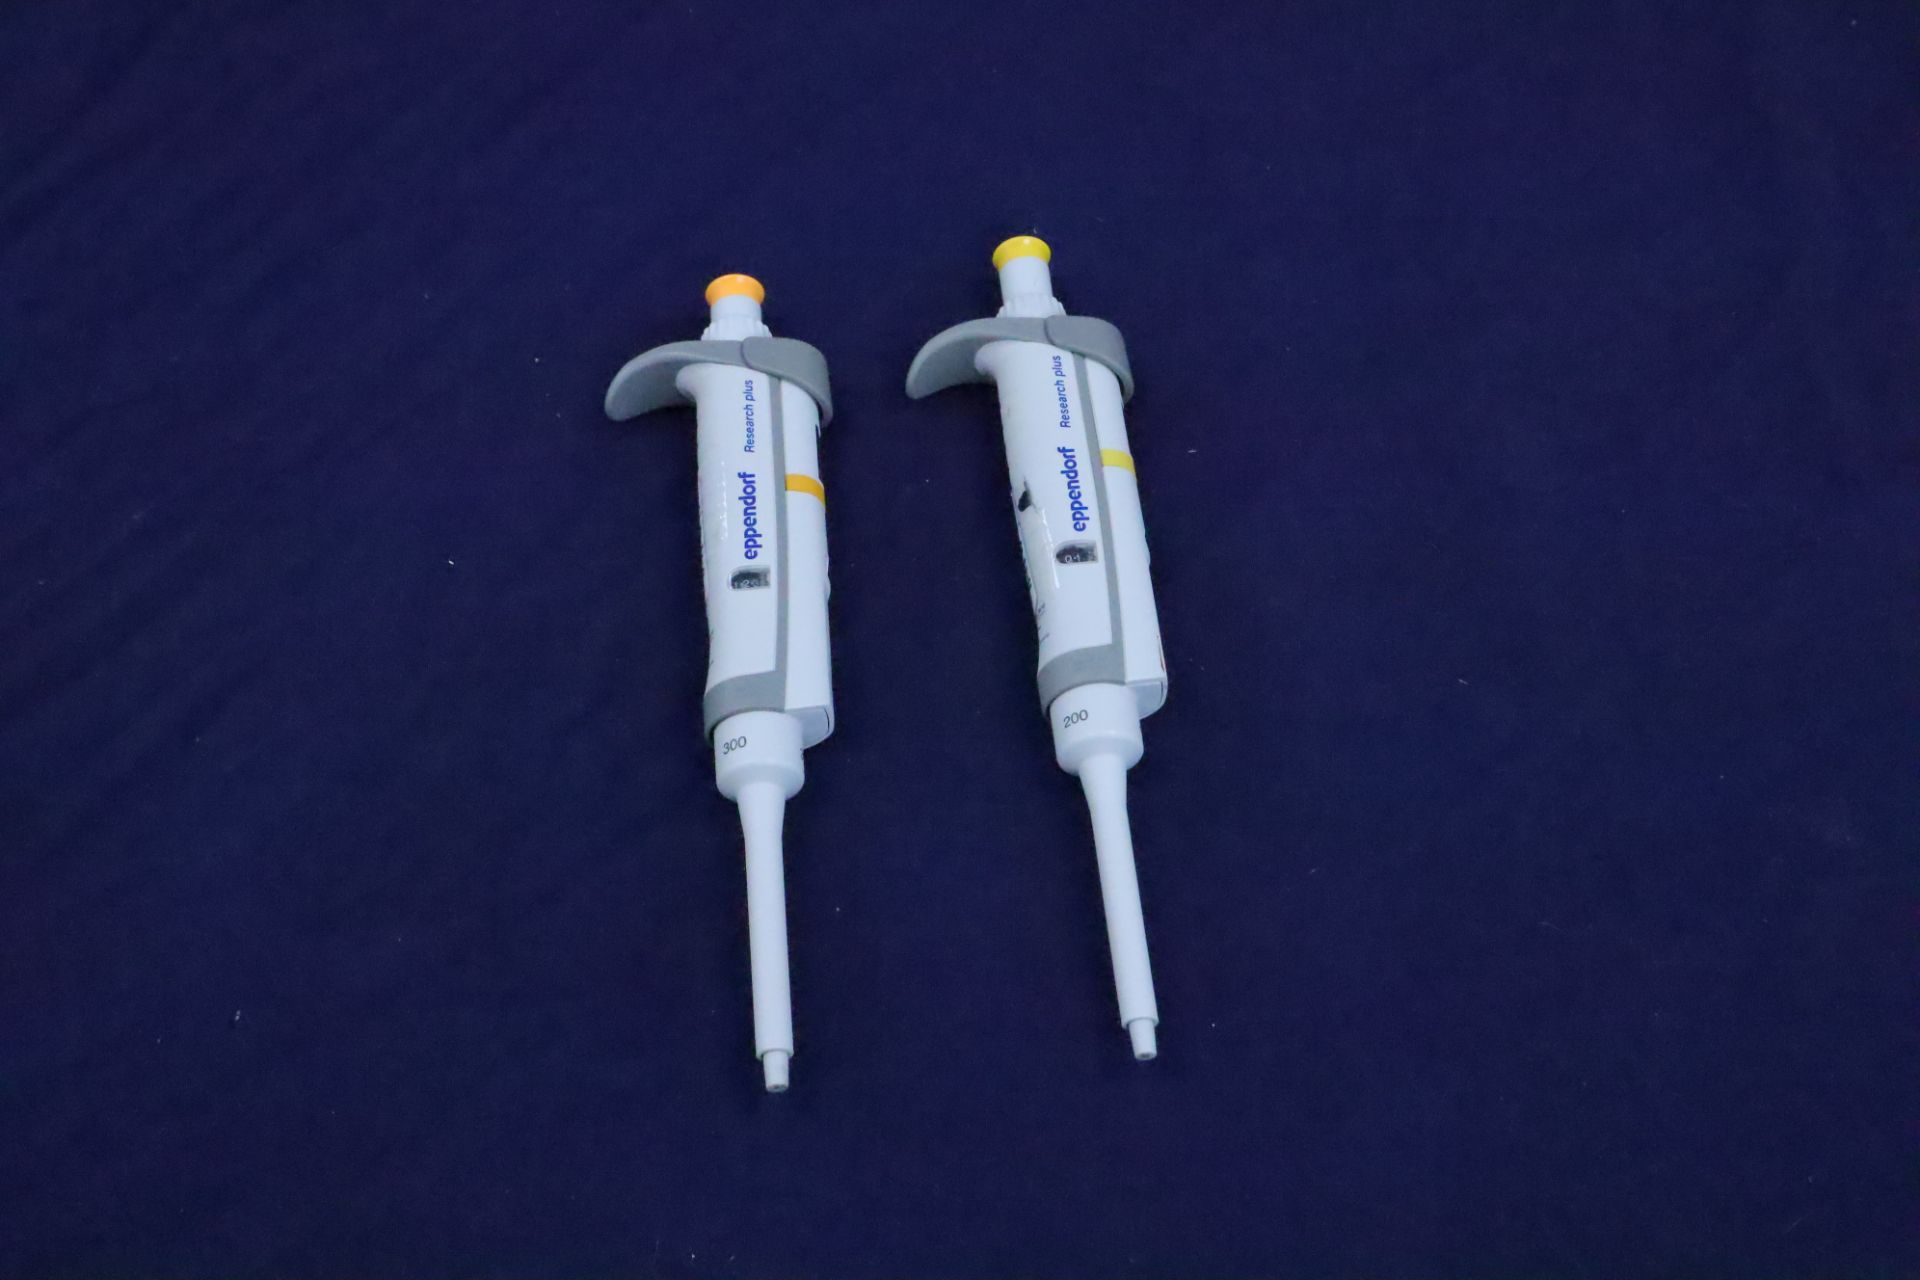 Eppendorf Research Plus Adjustable Volume Pipette 20-200 uL & 30-300 uL - Image 2 of 8